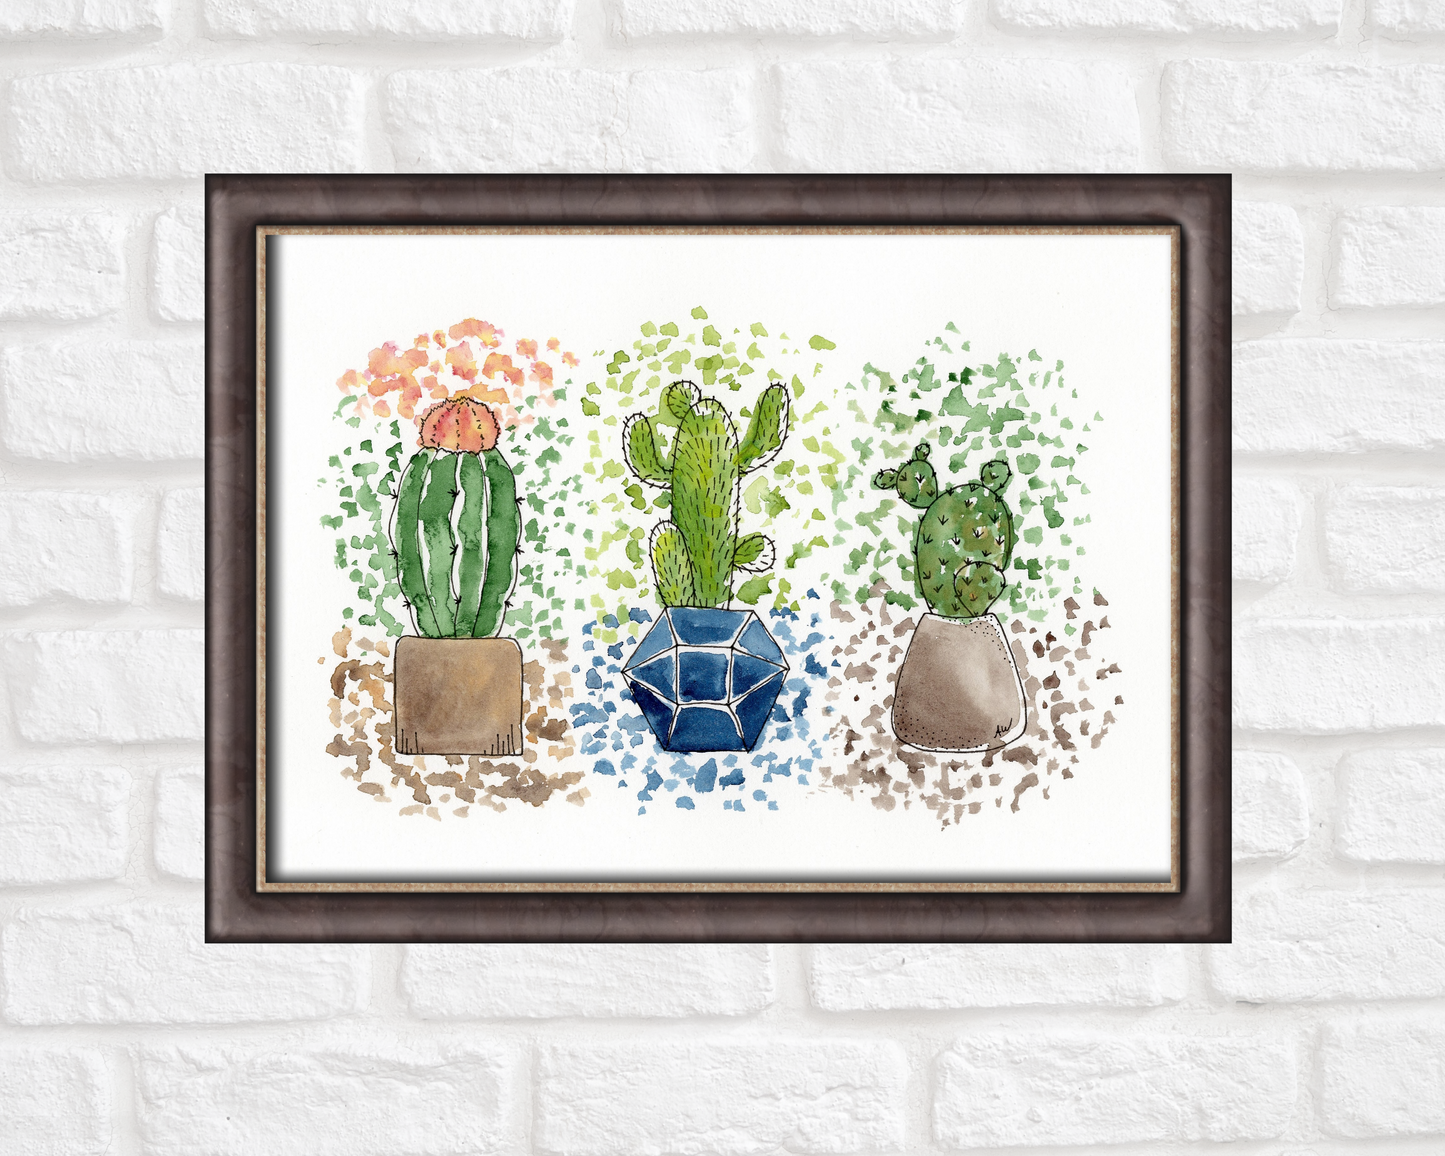 Splatter Cacti Pen and Watercolor Painting - Archival Quality Art Print